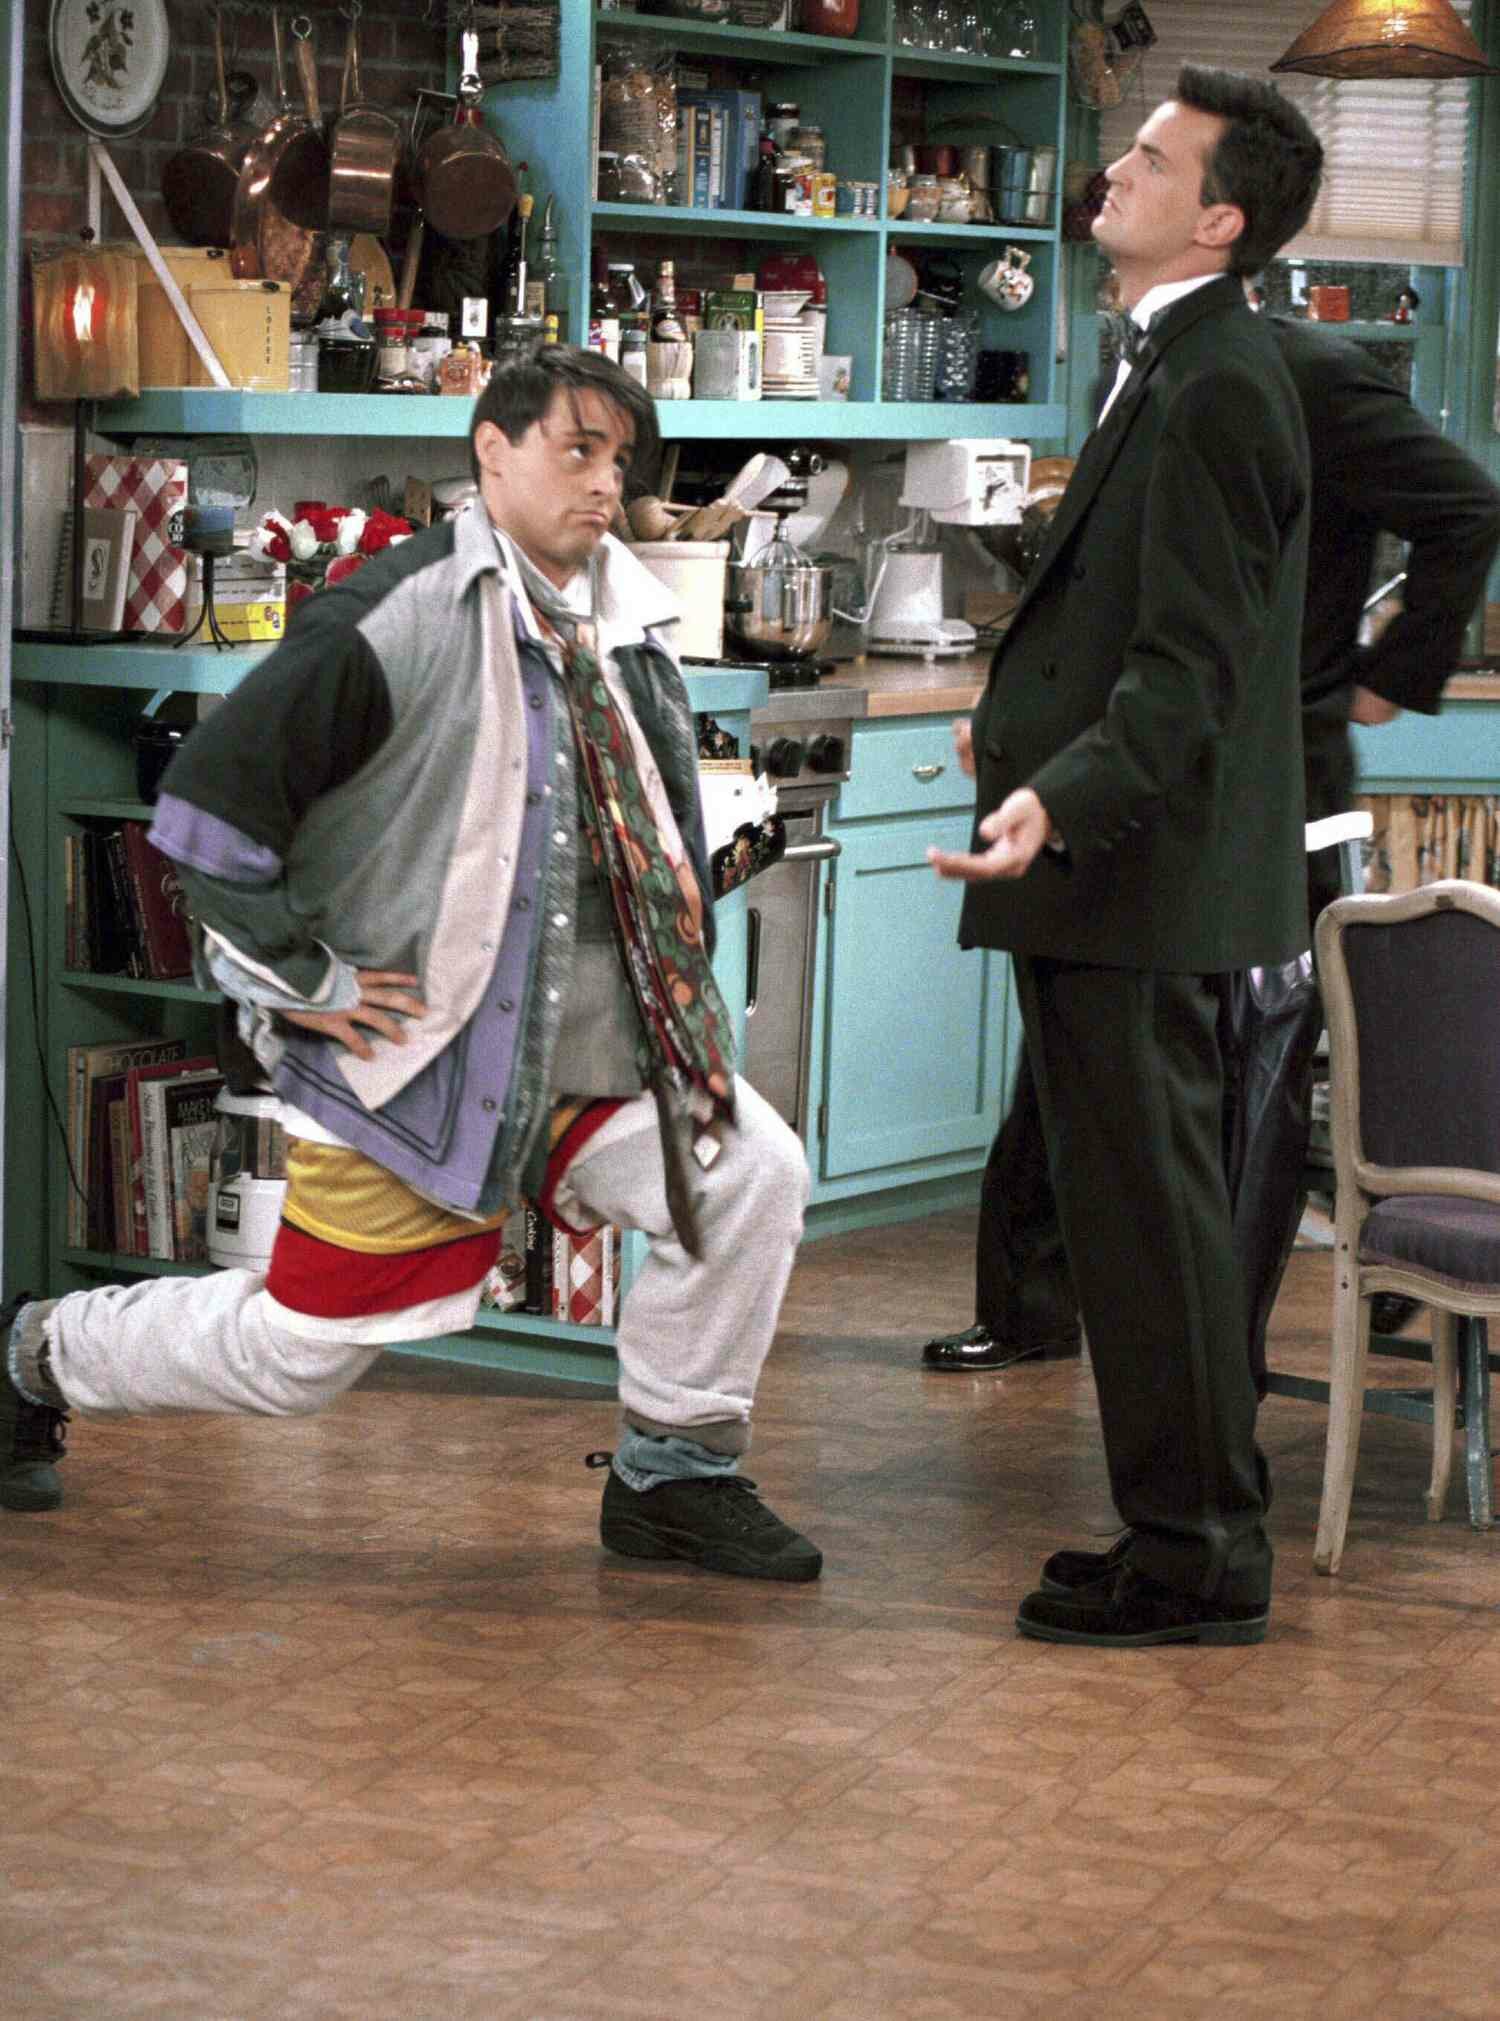 Joey Tribbiani Doing Lunges in All of Chandler Bing's Clothes